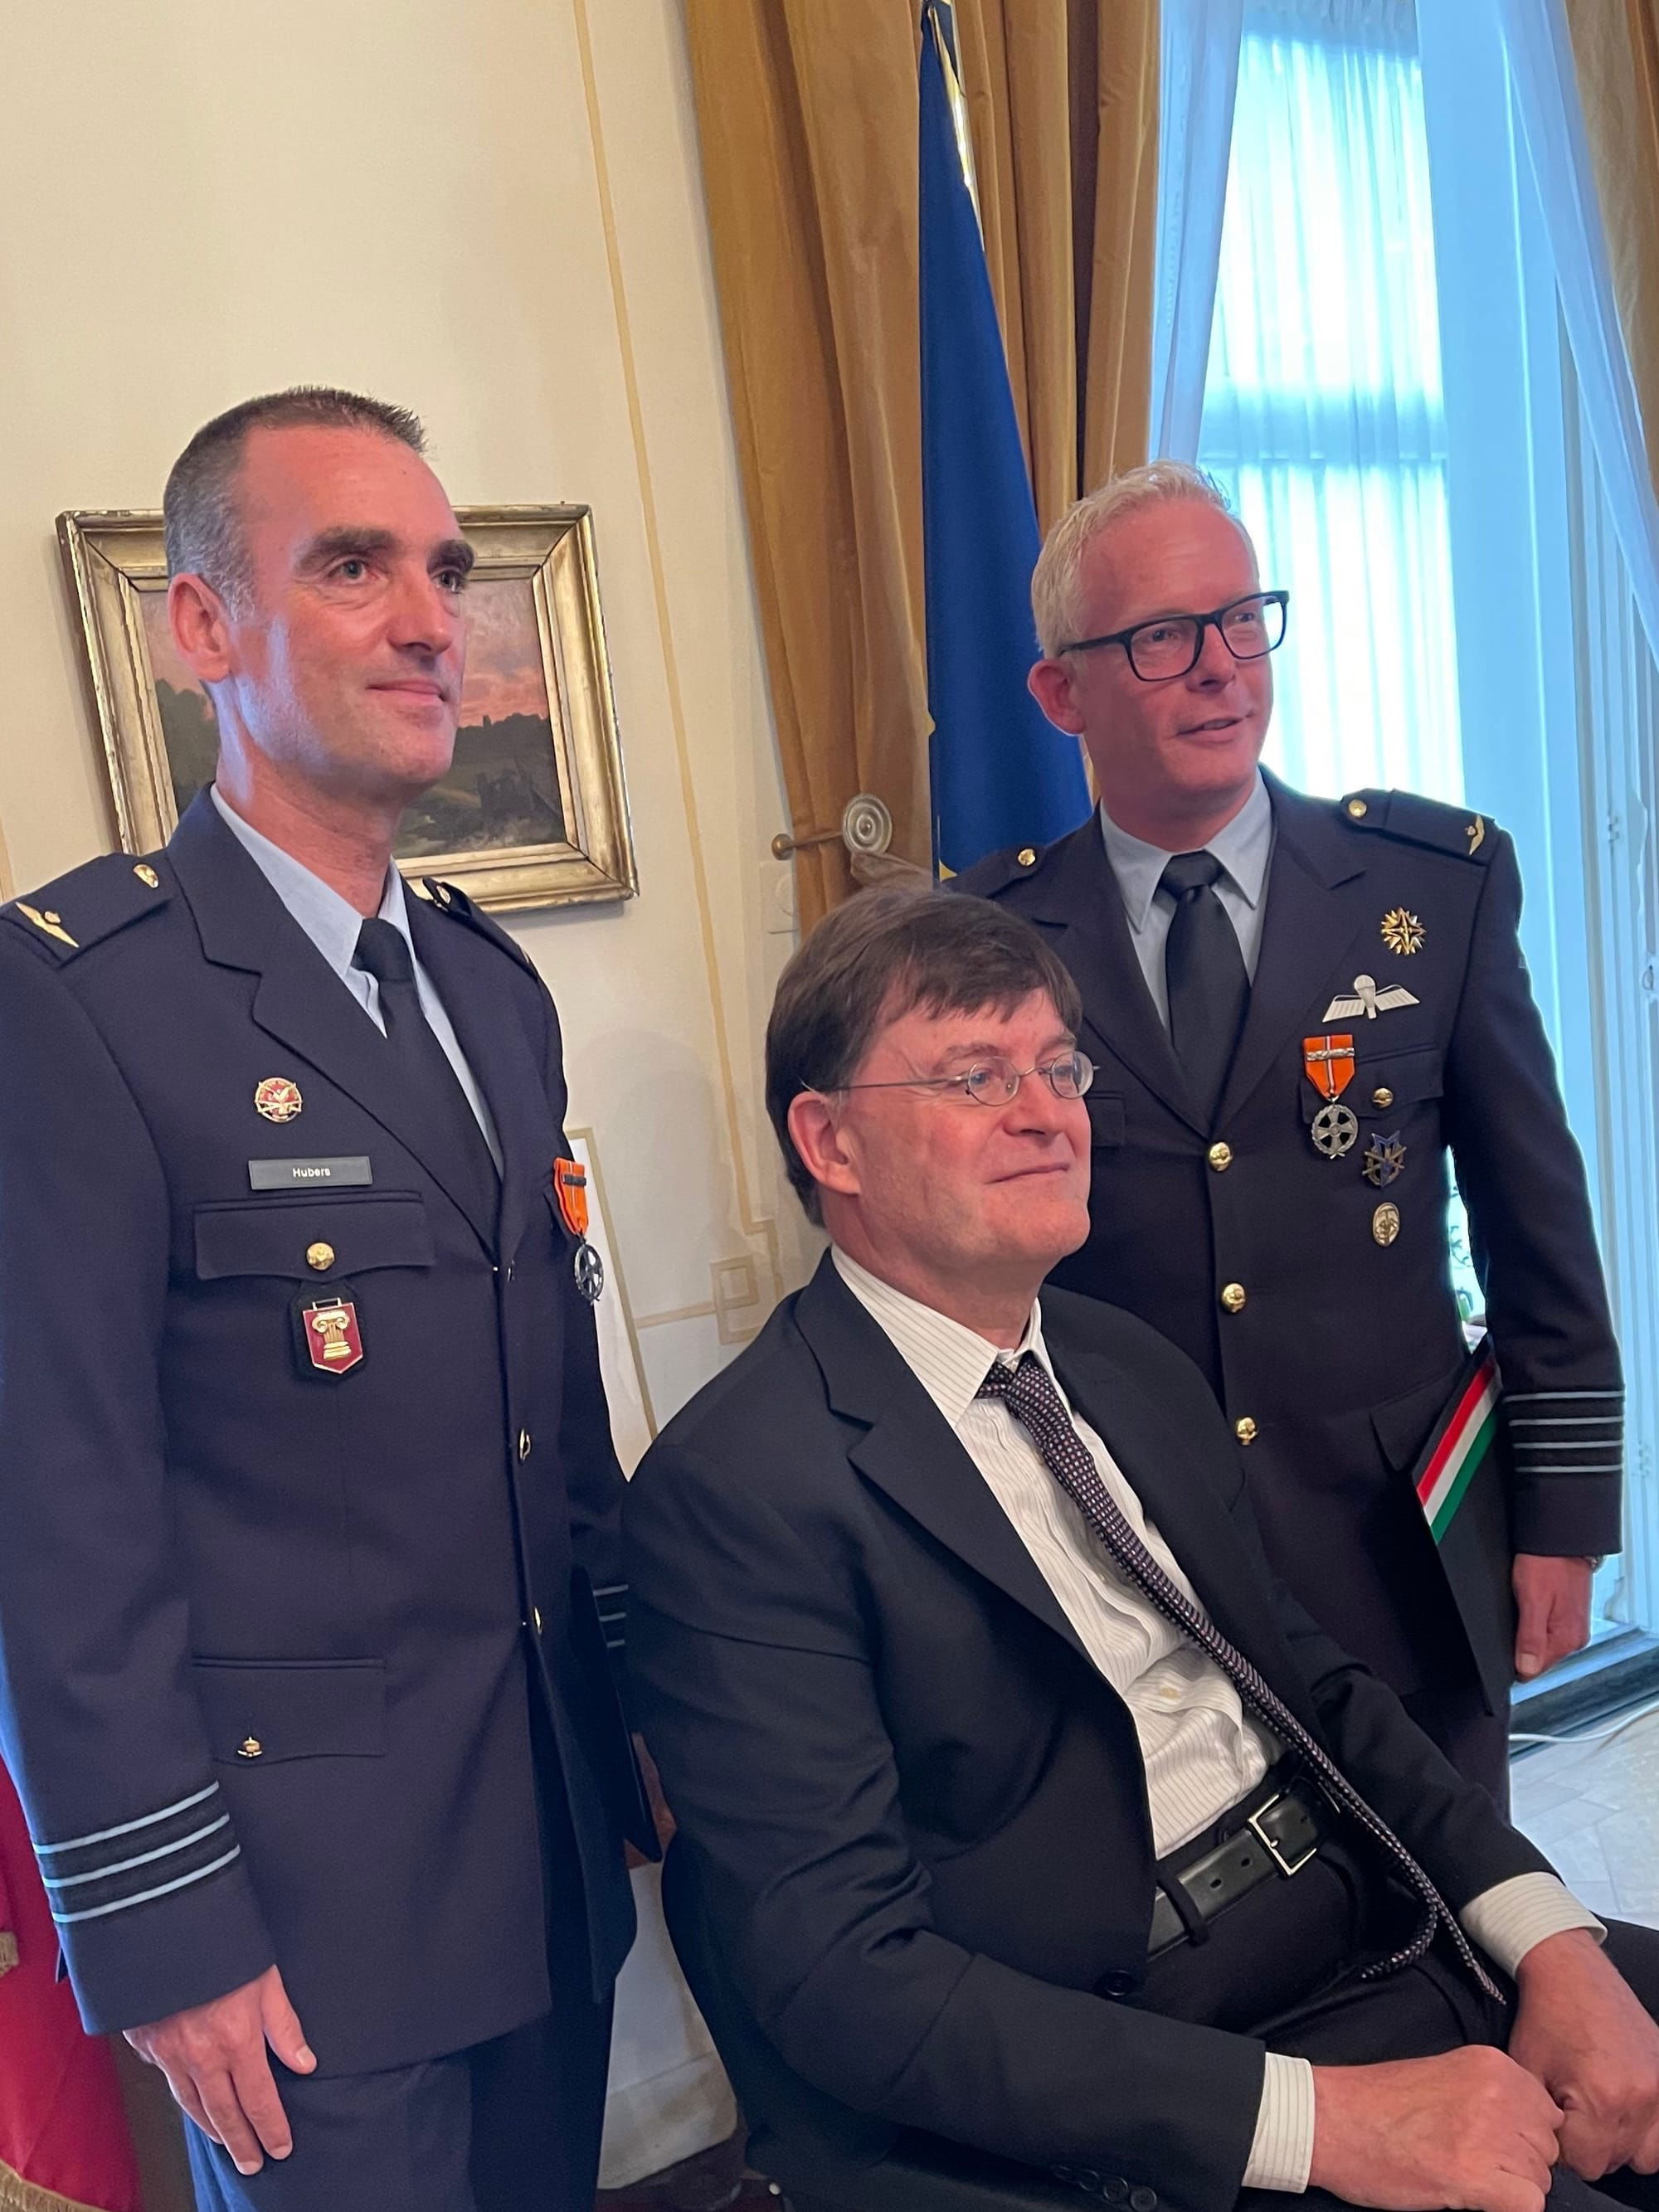 Ceremony to award two Royal Dutch Air Force Officers with an Italian Award invited by our Patron Ambassador Giorgio Novello at his Residence, the Hague